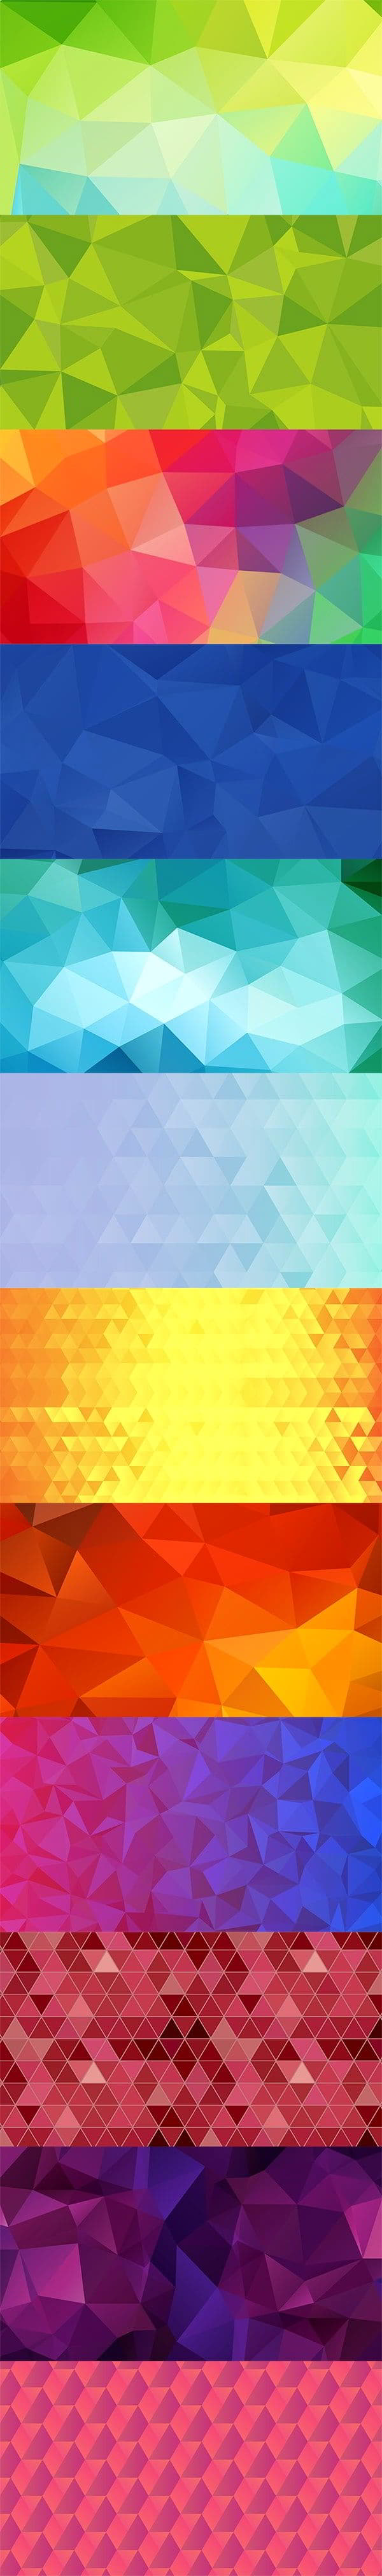 high quality polygon backgrounds